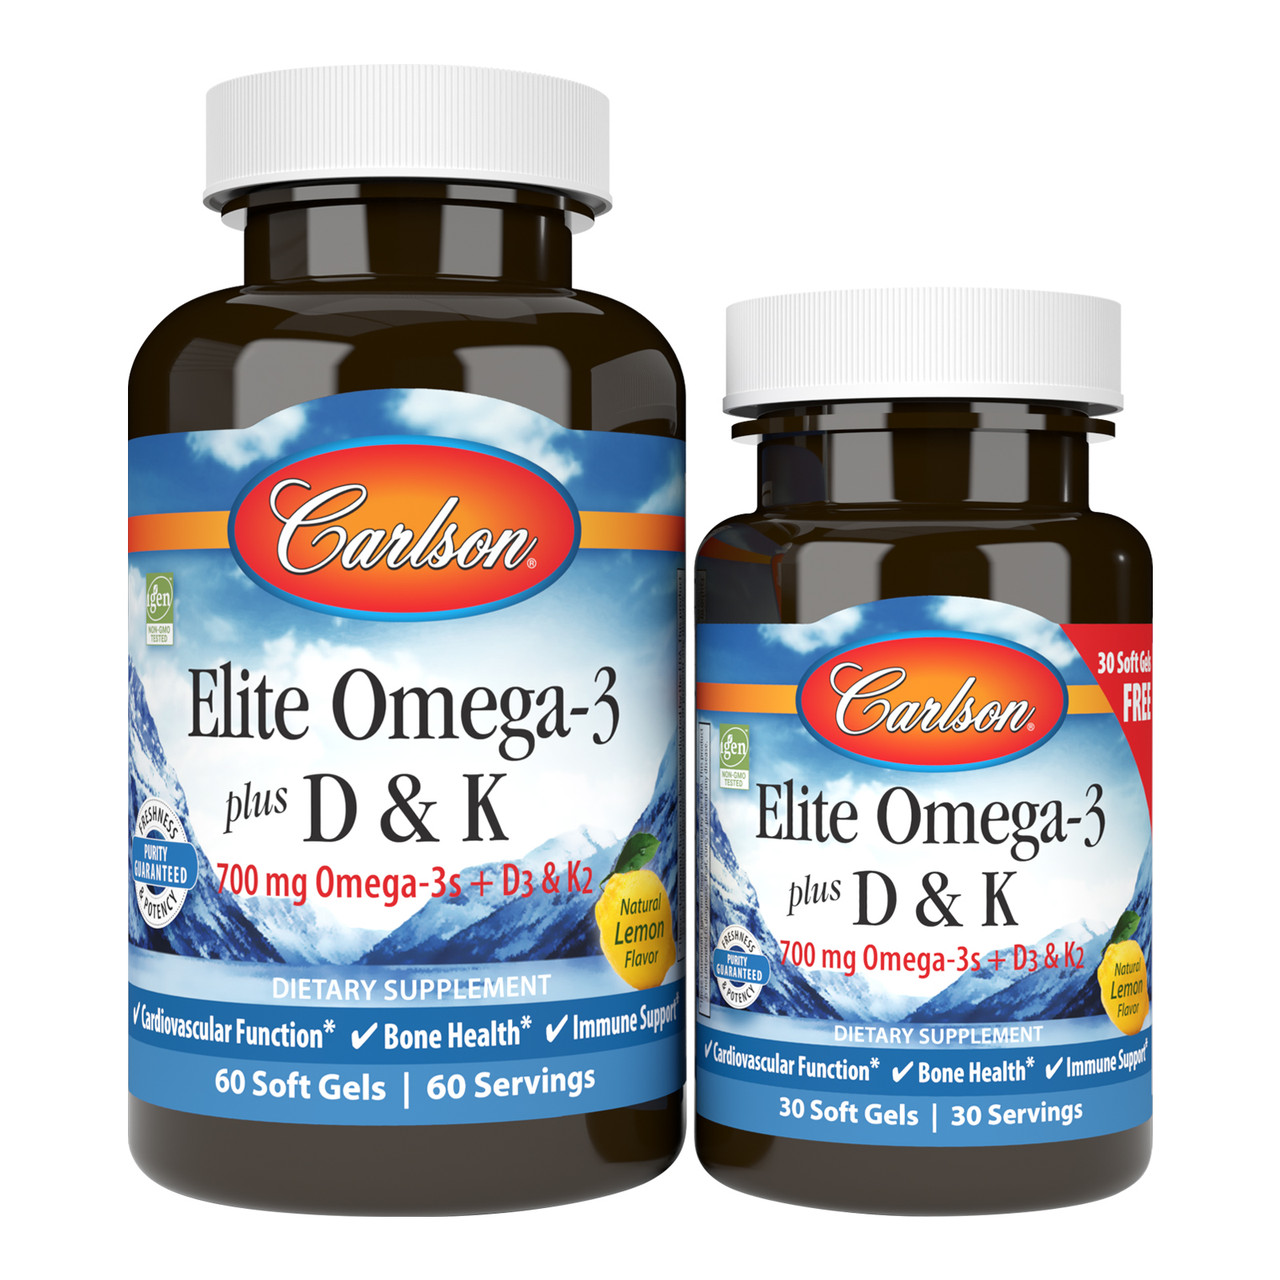 Get Your Daily Dose of Omega-3 and Vitamin D with Elite Omega-3 + D & K